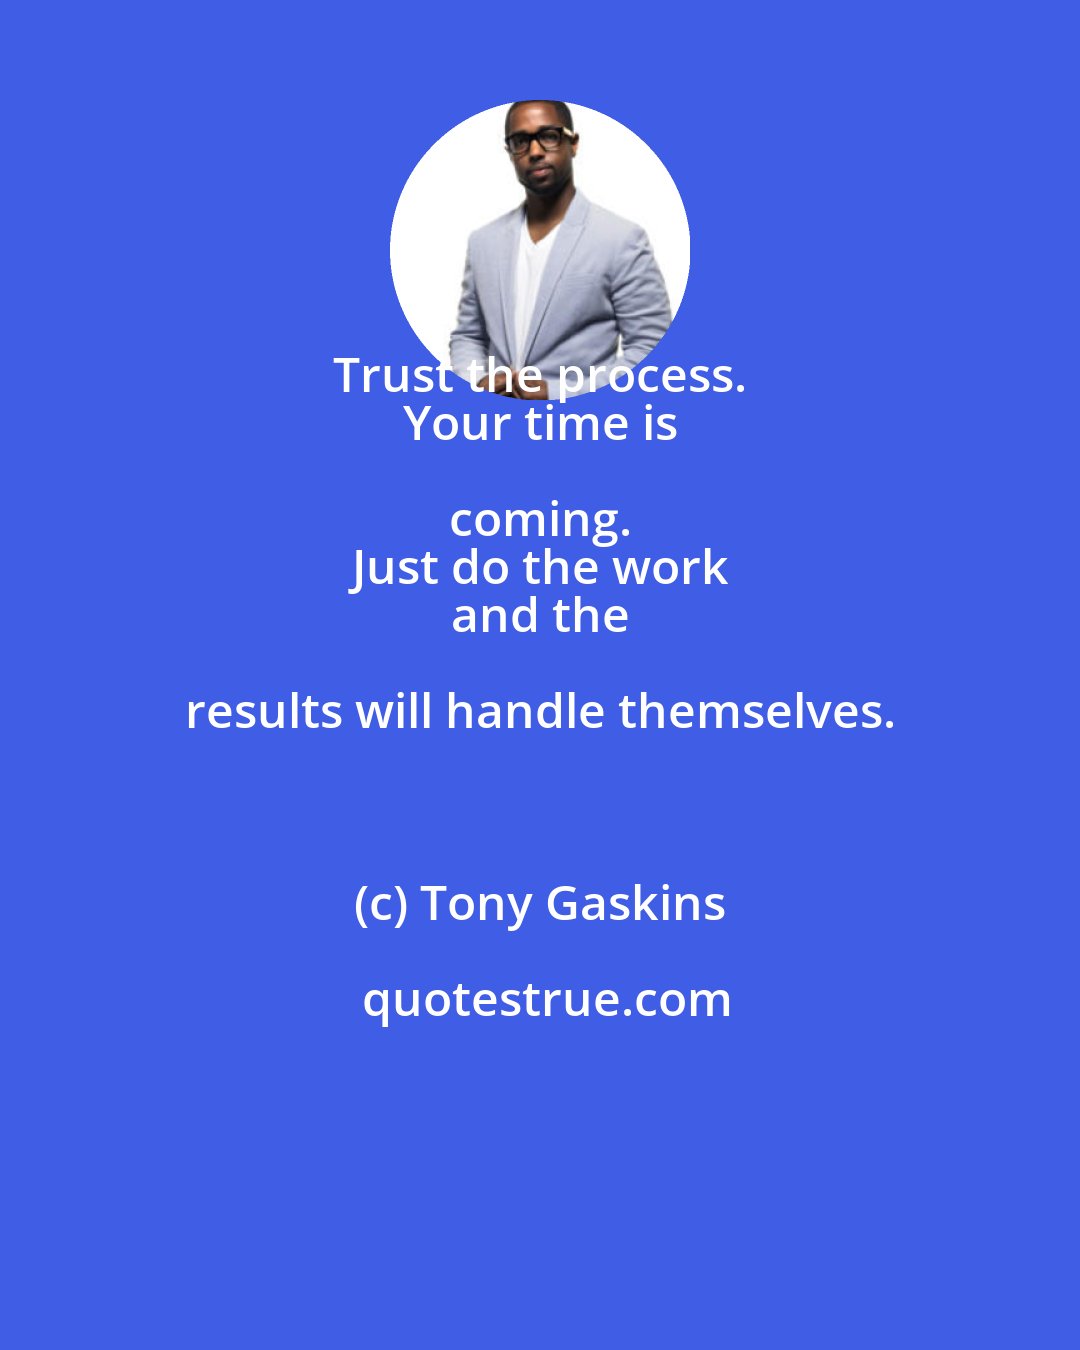 Tony Gaskins: Trust the process. 
 Your time is coming. 
 Just do the work 
 and the results will handle themselves.